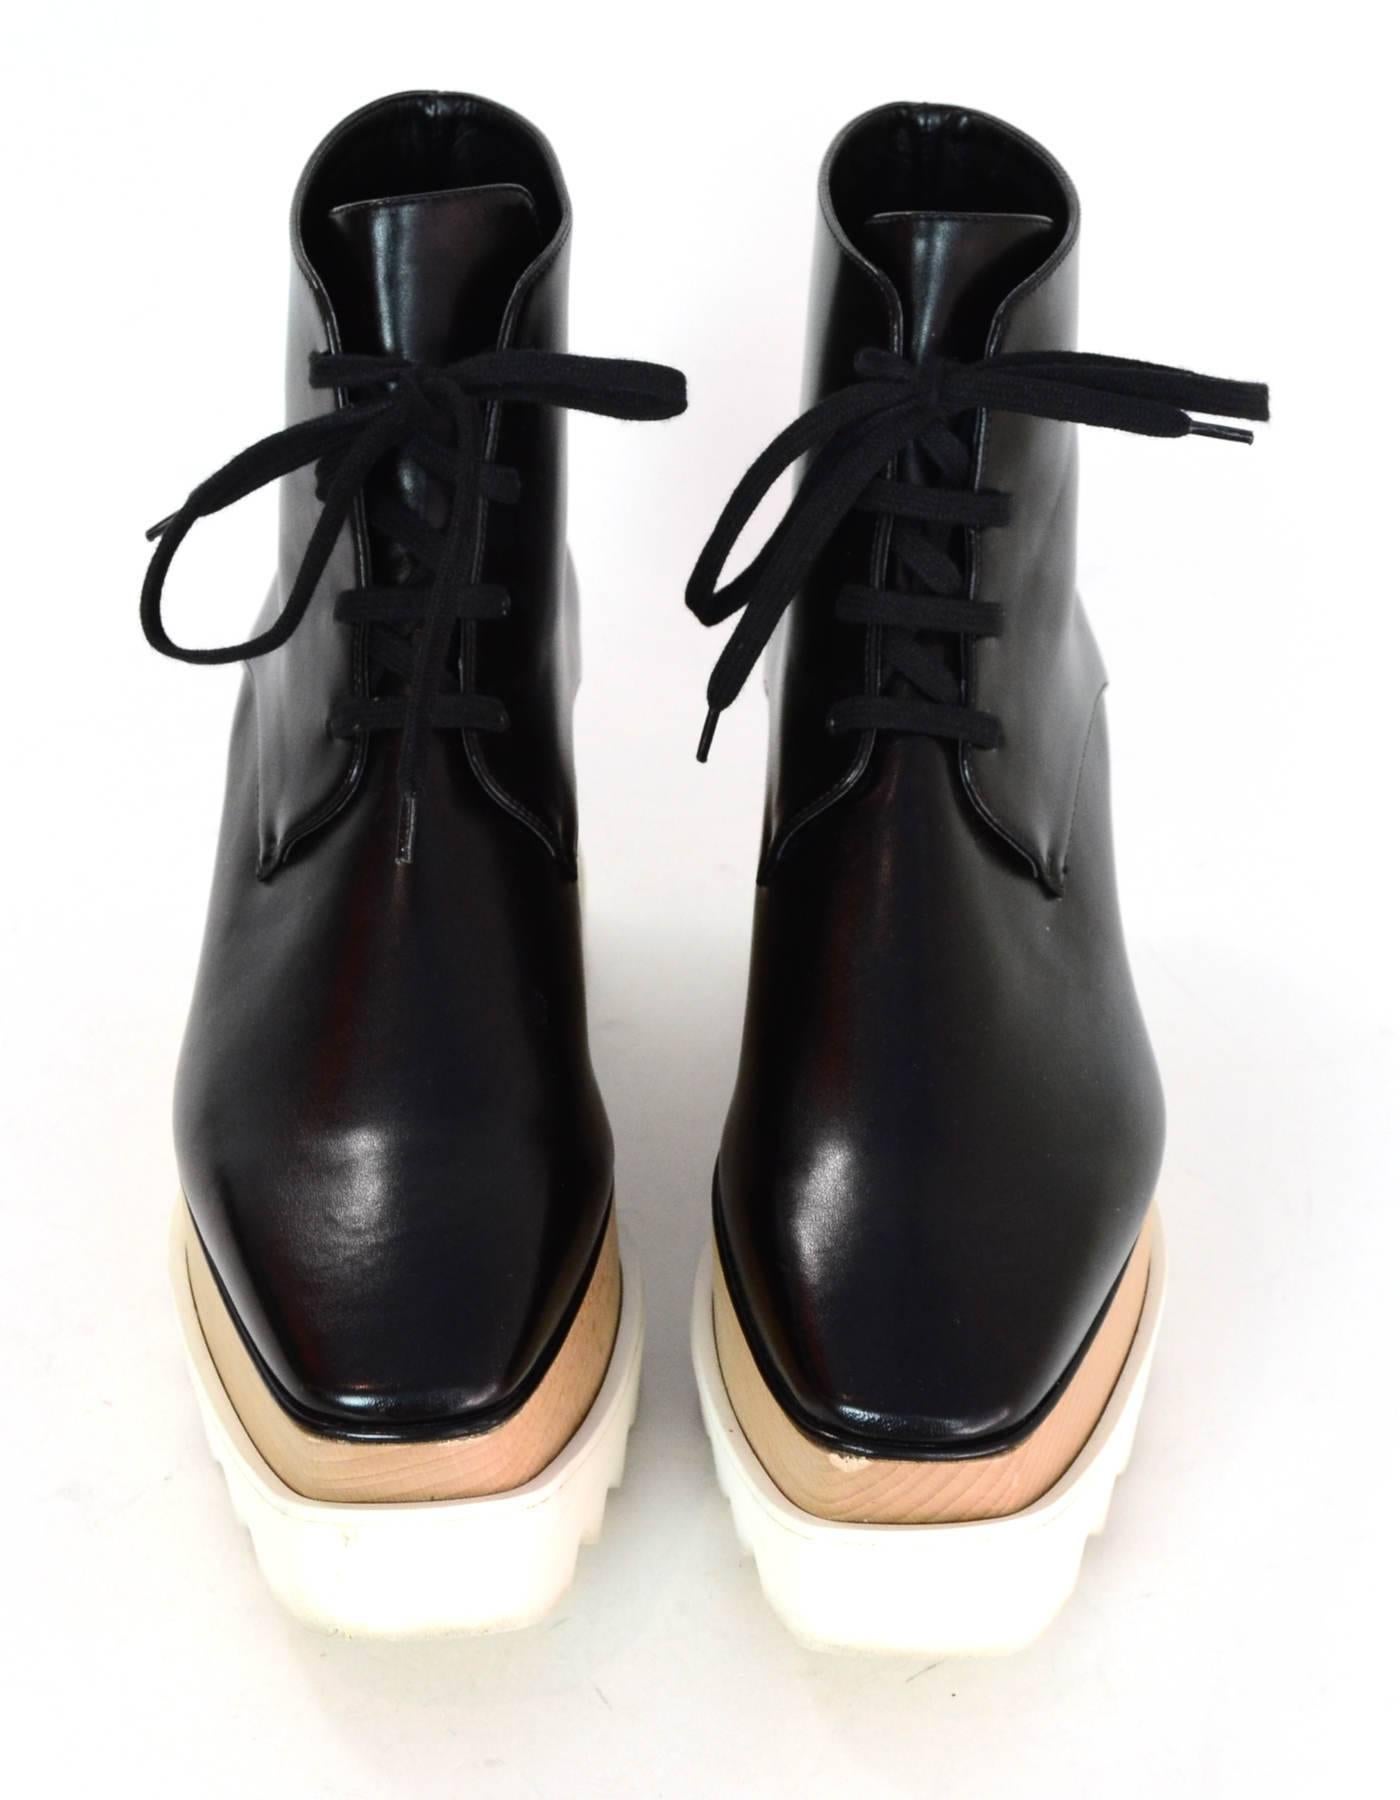 Stella McCartney Black Elyse Vegan Glossed Leather Boots Sz 38.5

Made In: Italy
Color: Black
Materials: Glossed vegan leather, rubber
Closure/Opening: Lace tie closure
Sole Stamp: Stella McCartney 38.5
Retail Price: $840 + tax
Overall Condition: